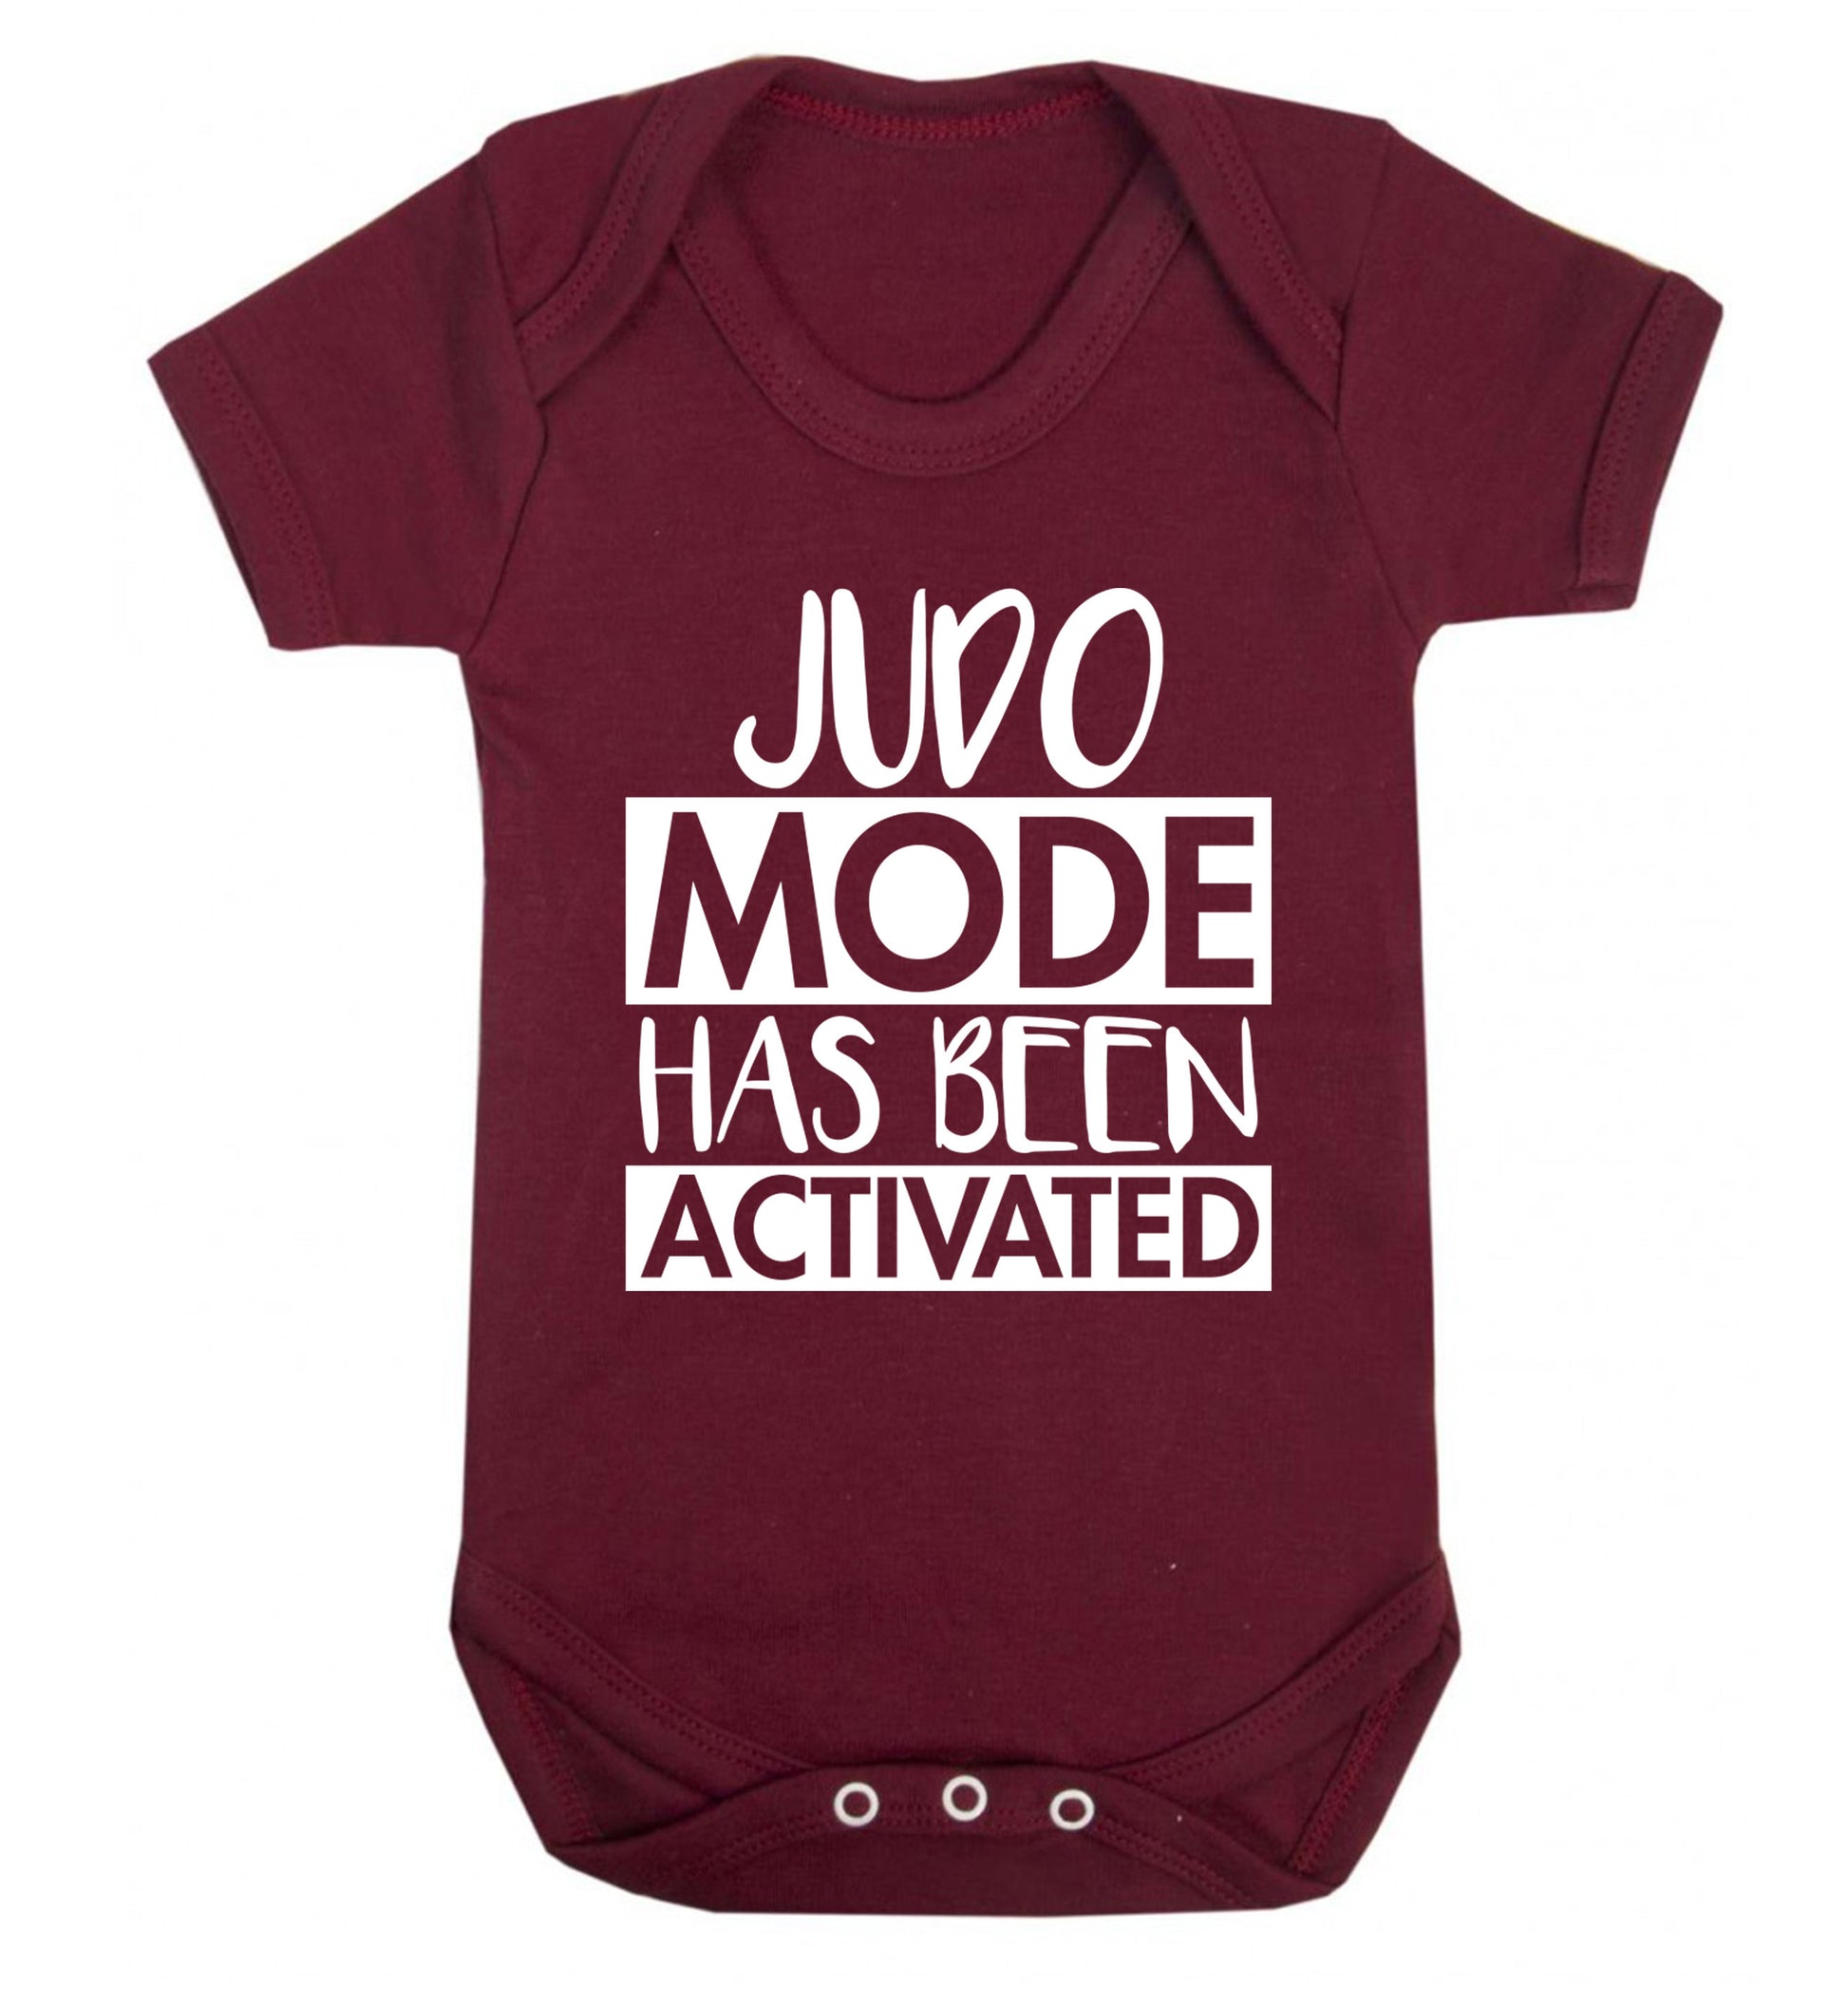 Judo mode activated Baby Vest maroon 18-24 months